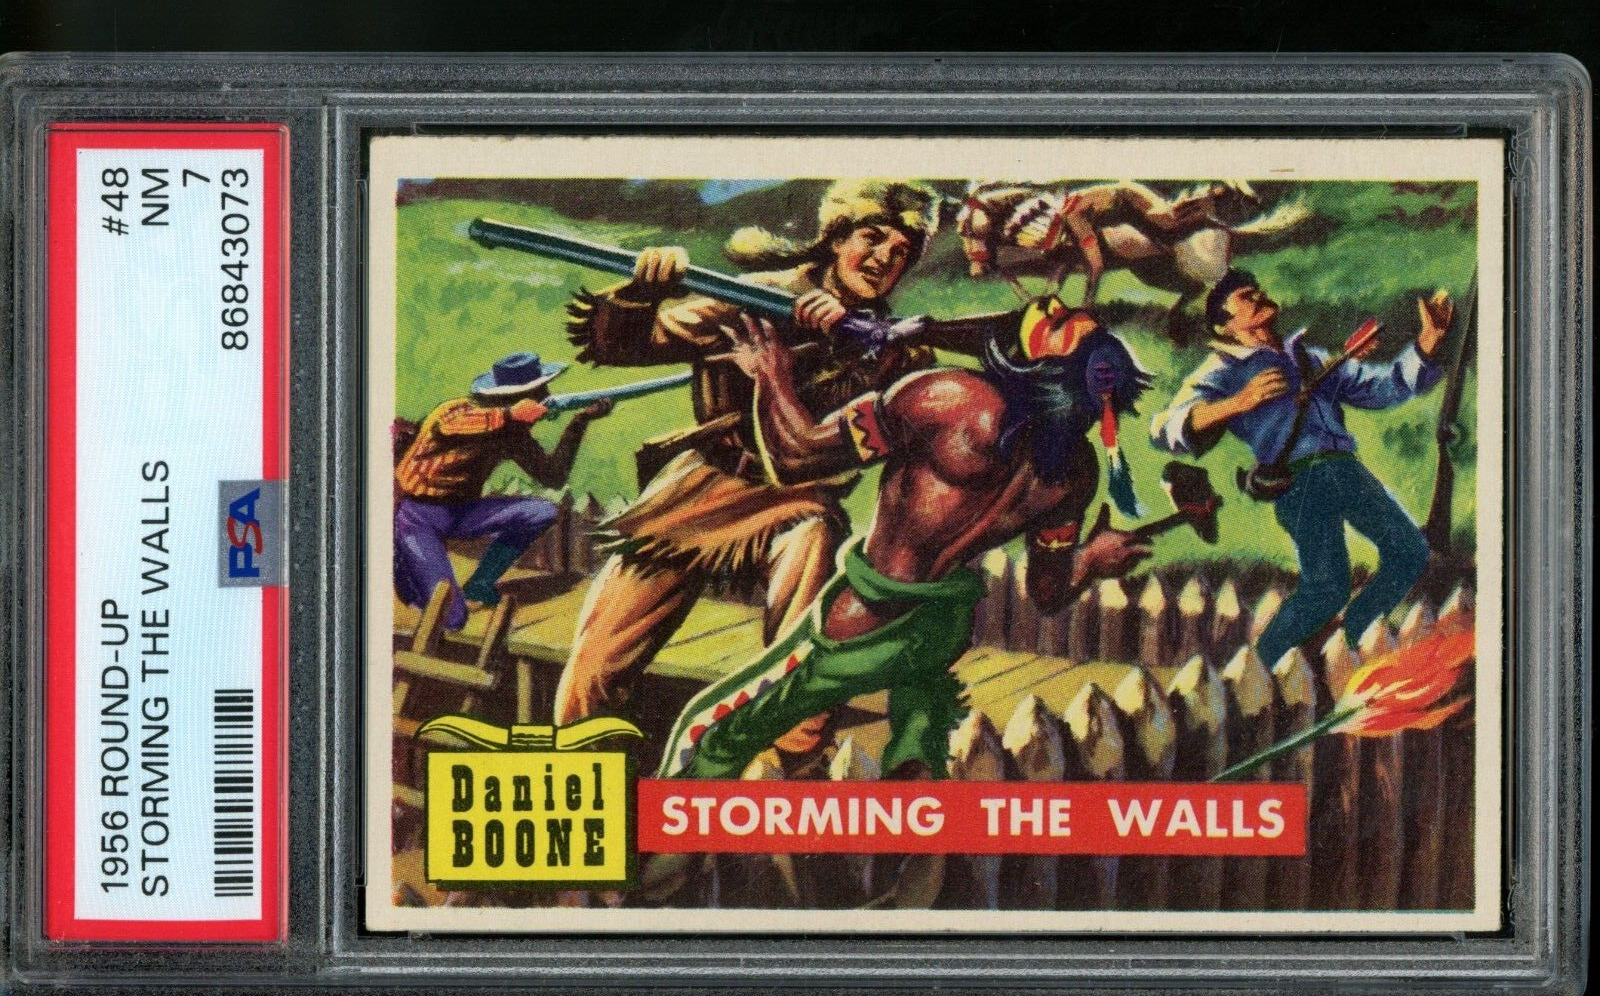 1956 Topps Roundup Daniel Boone Storming the Walls #48 PSA 7